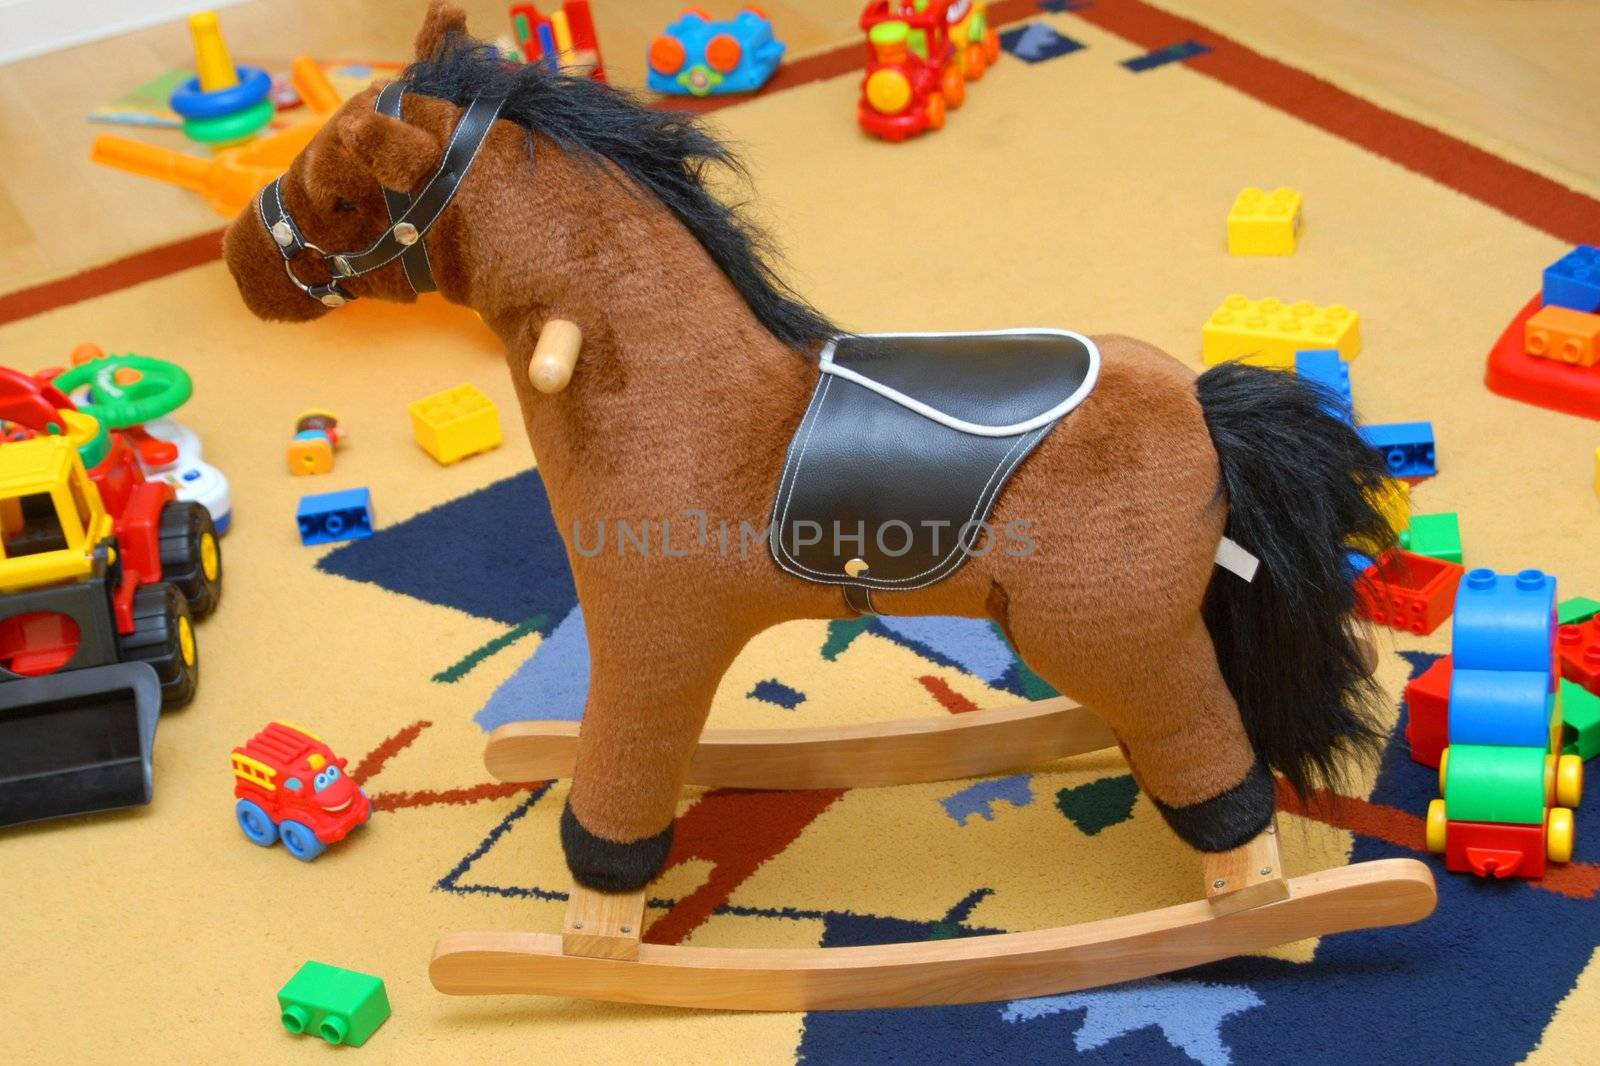 A rocking horse in the child's room